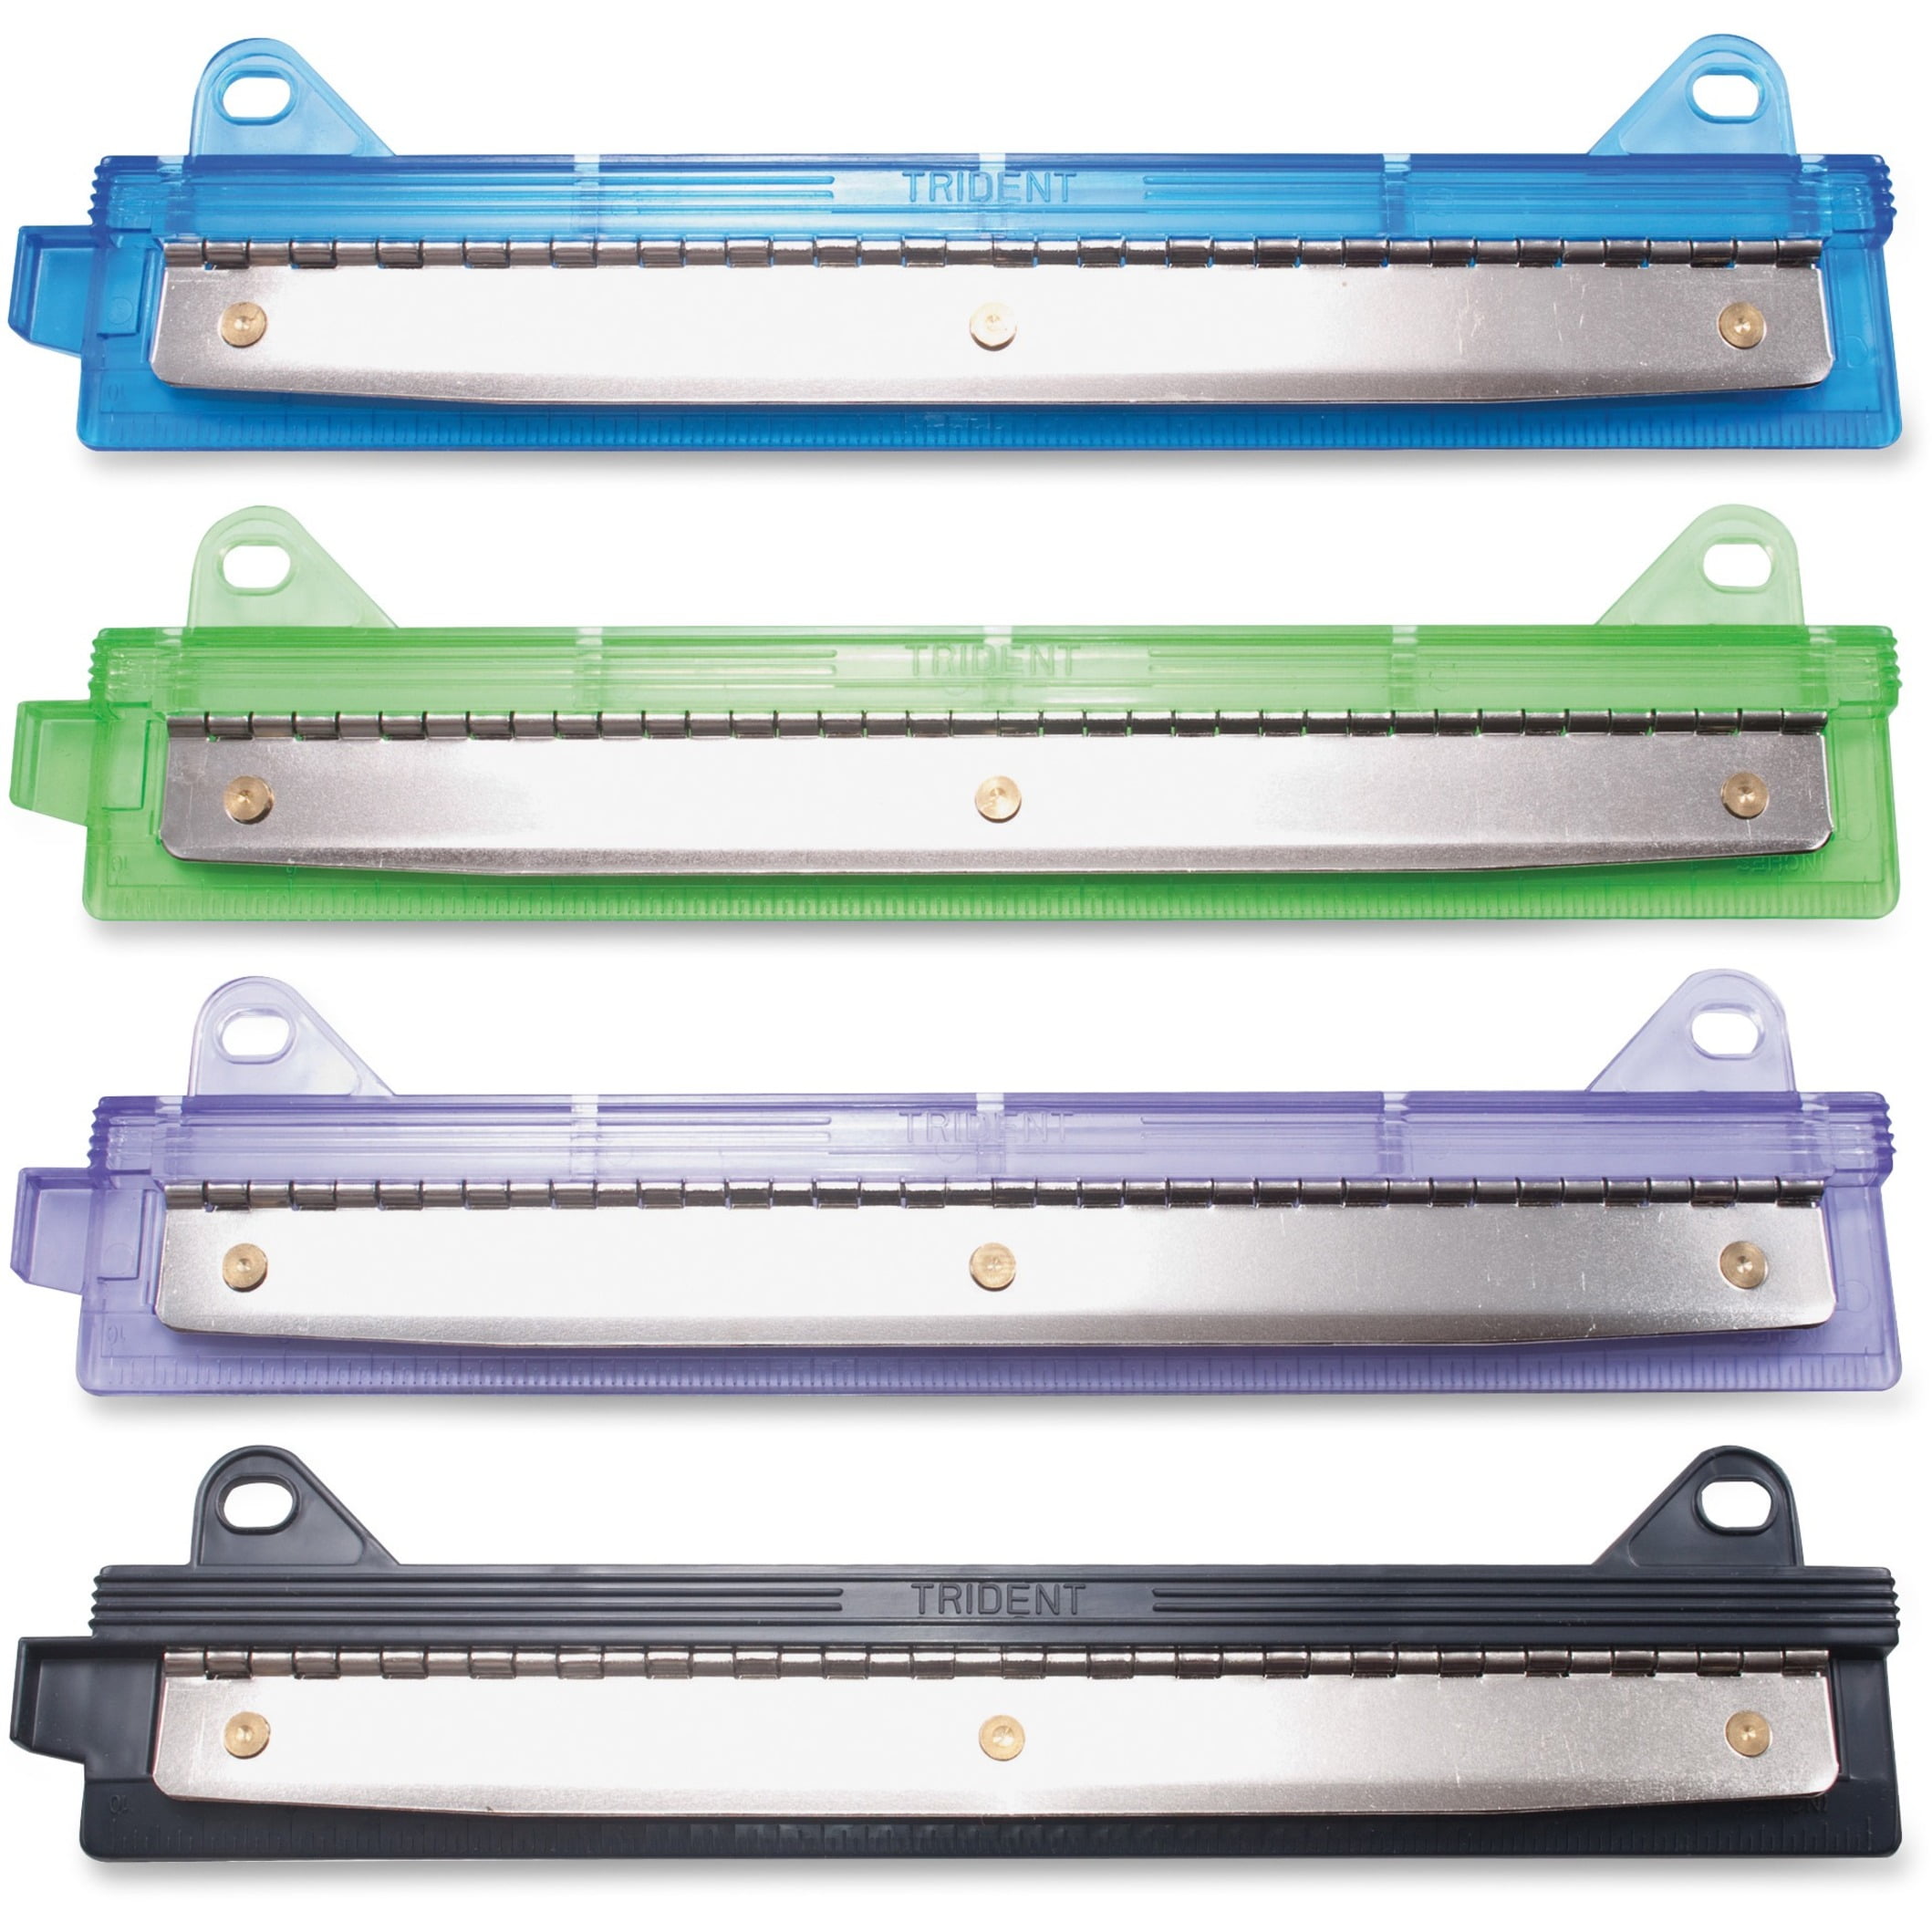 6-Sheet Trident Binder Punch, Three-Hole, 1/4 Holes, Assorted Colors